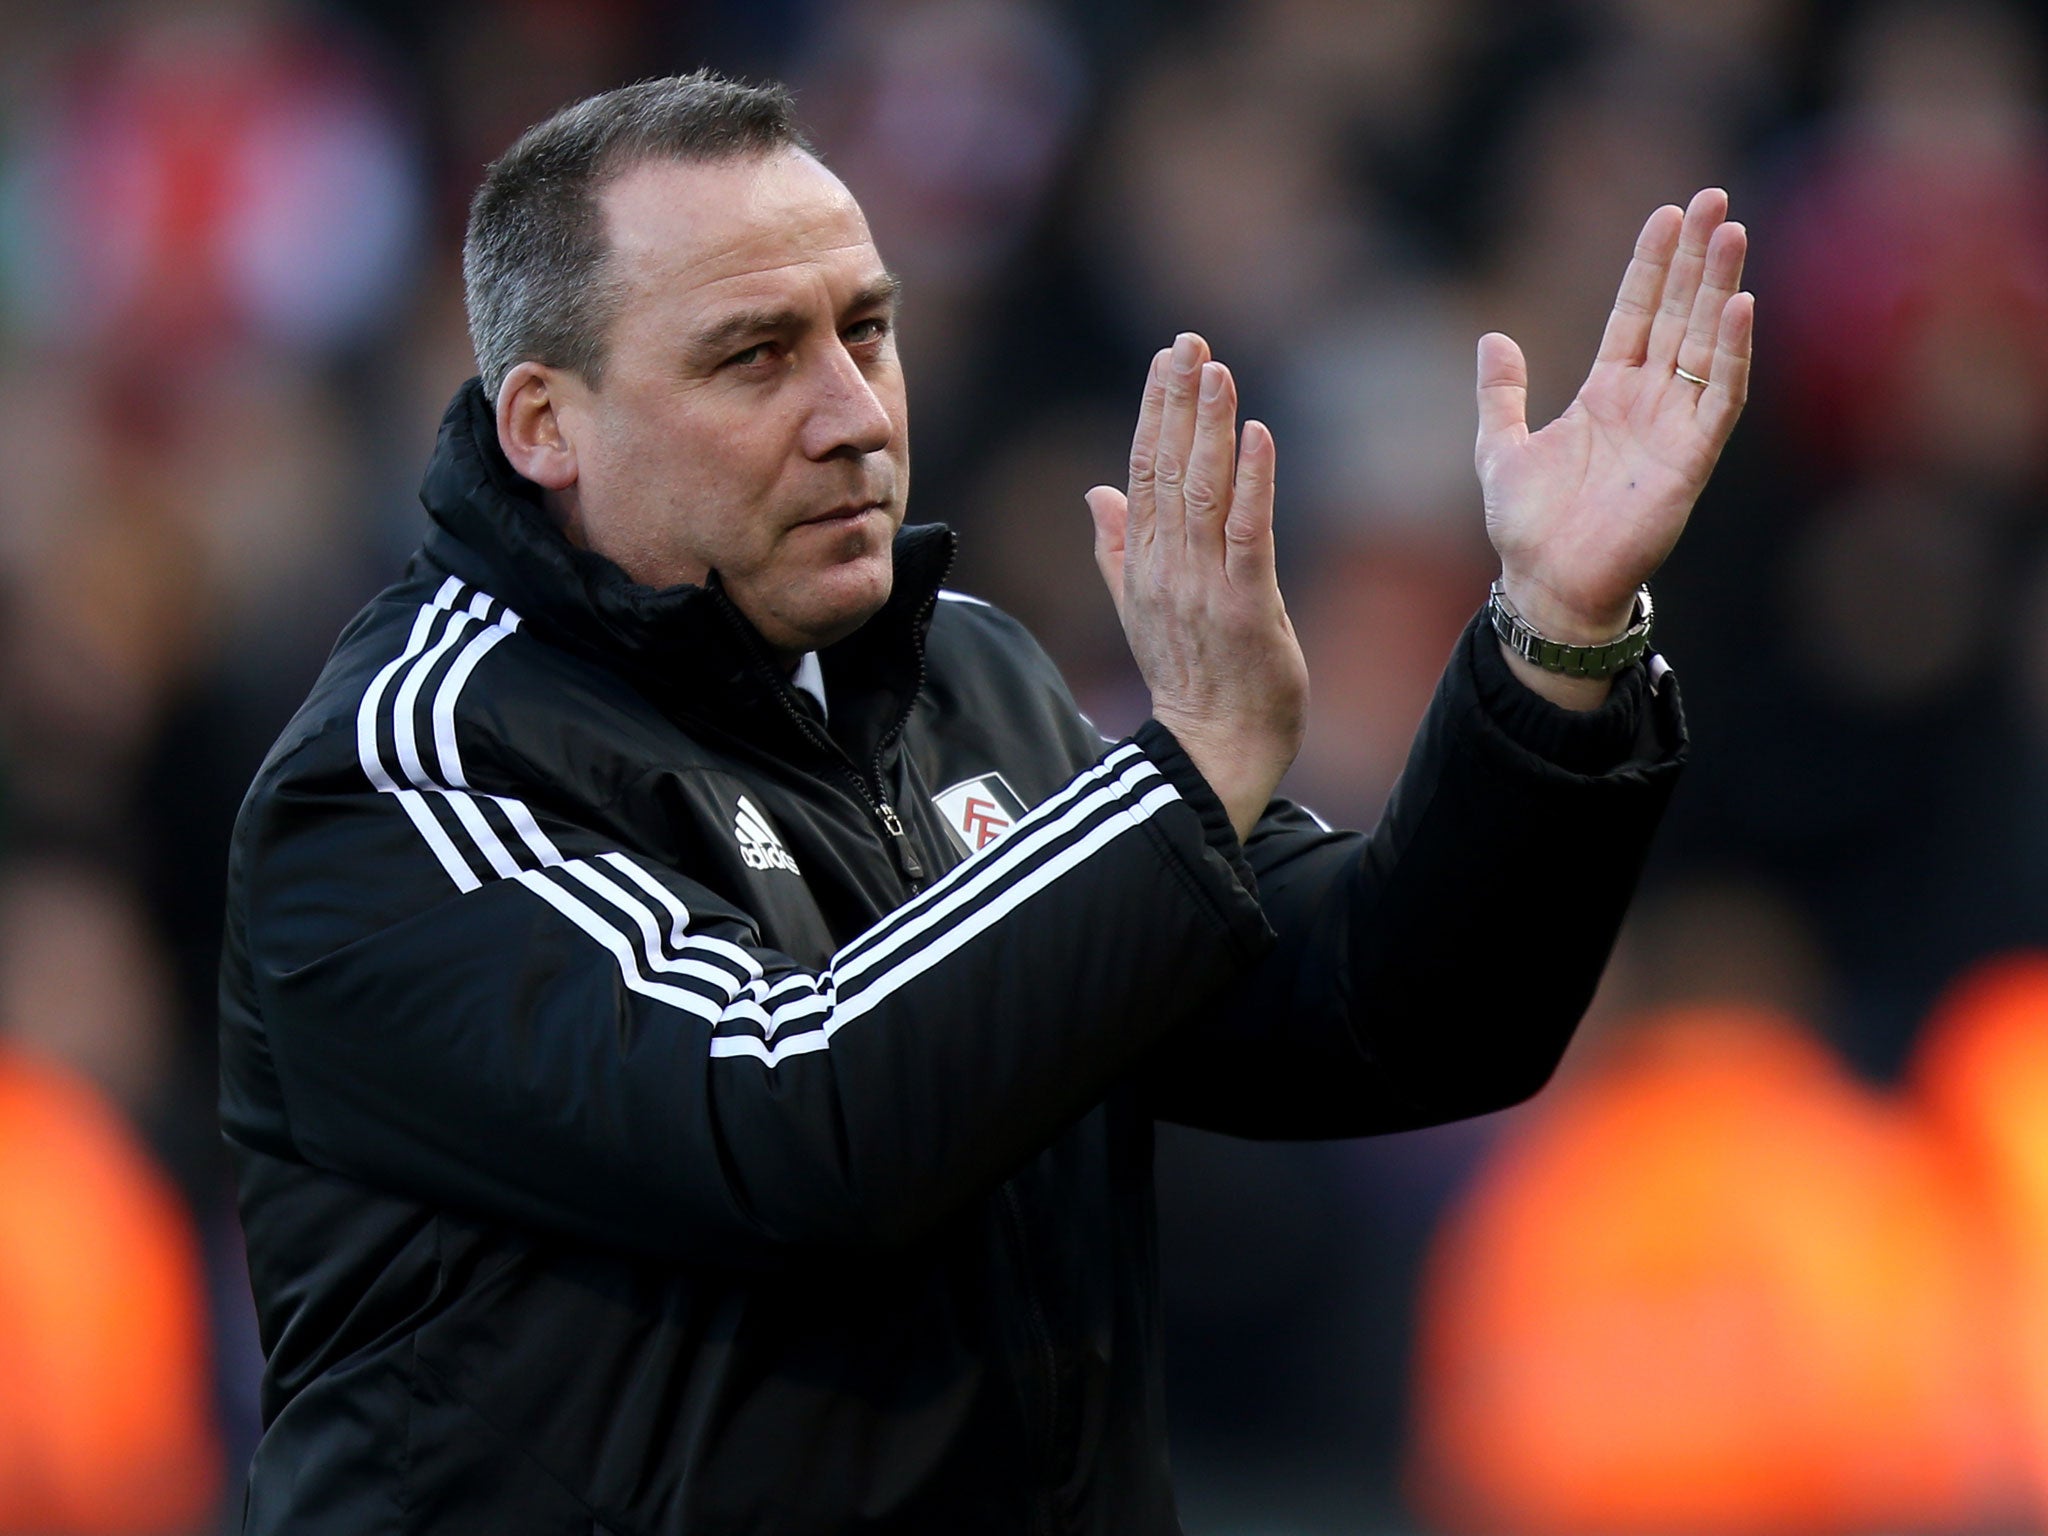 Fulham manager Rene Meulensteen knows from experience how crucial goal difference can be